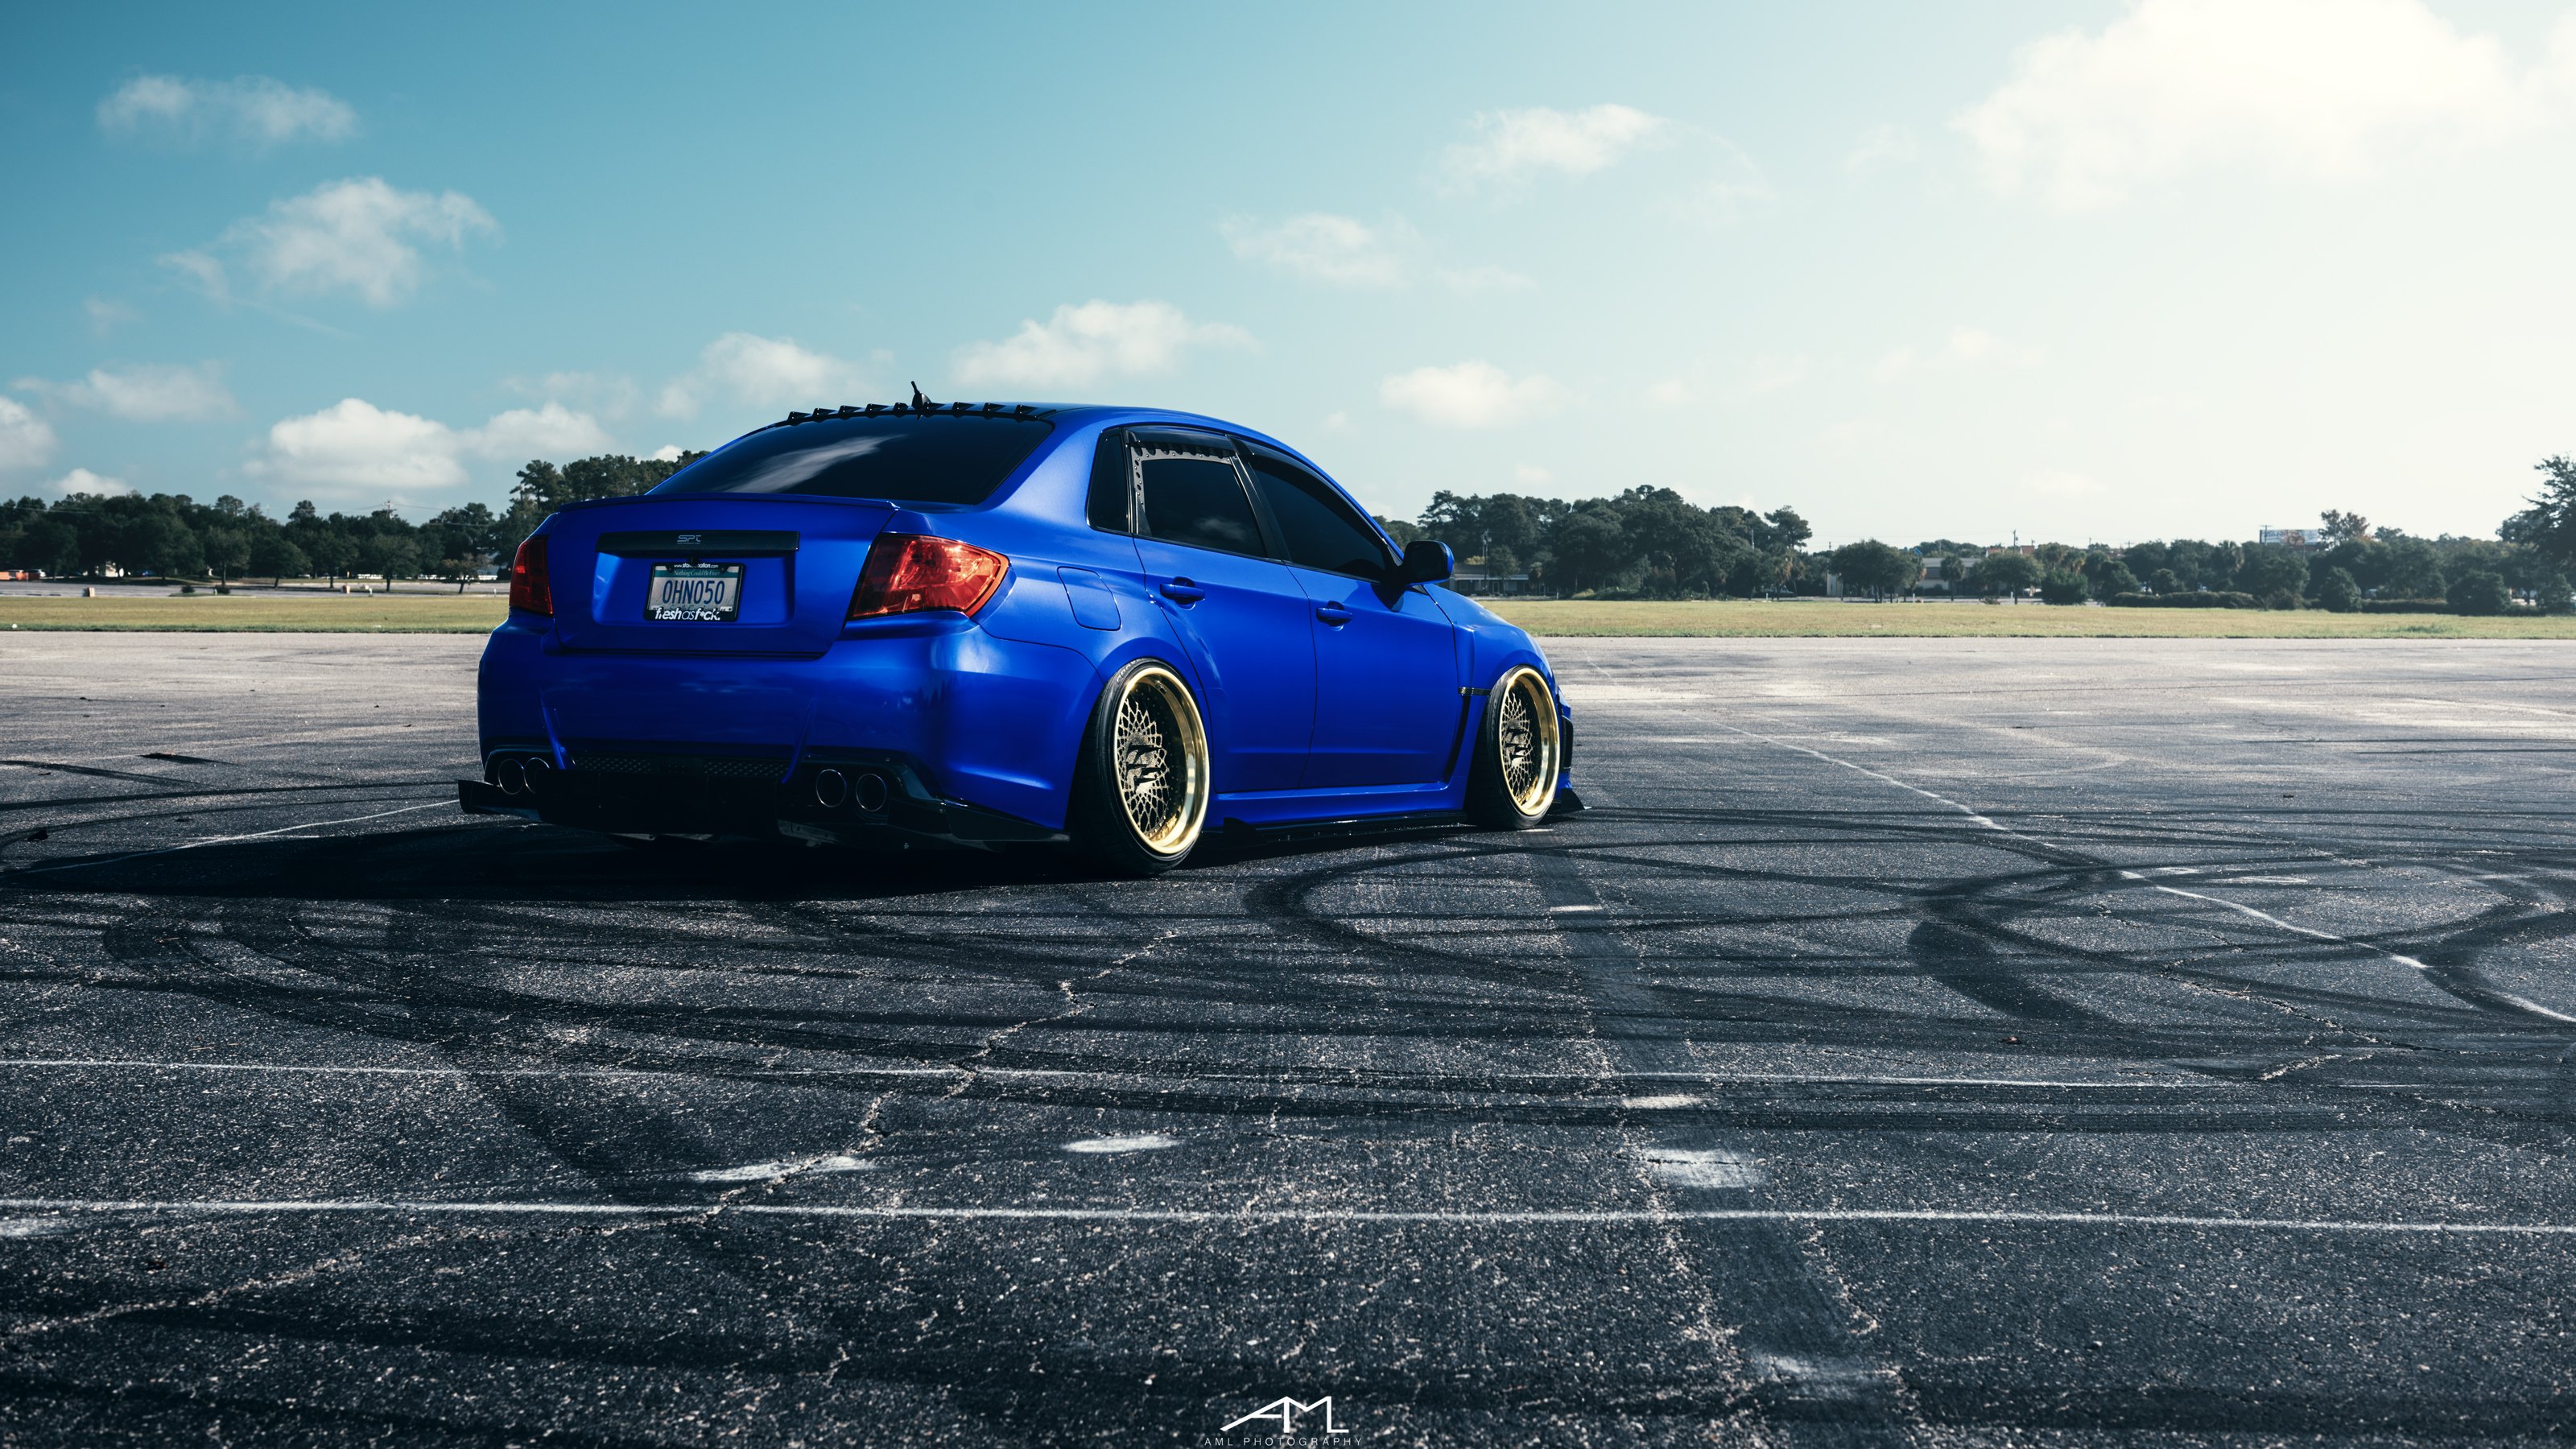 Blue Stanced Subaru WRX with Aftermarket Rear Diffuser - Photo by Arlen Liverman